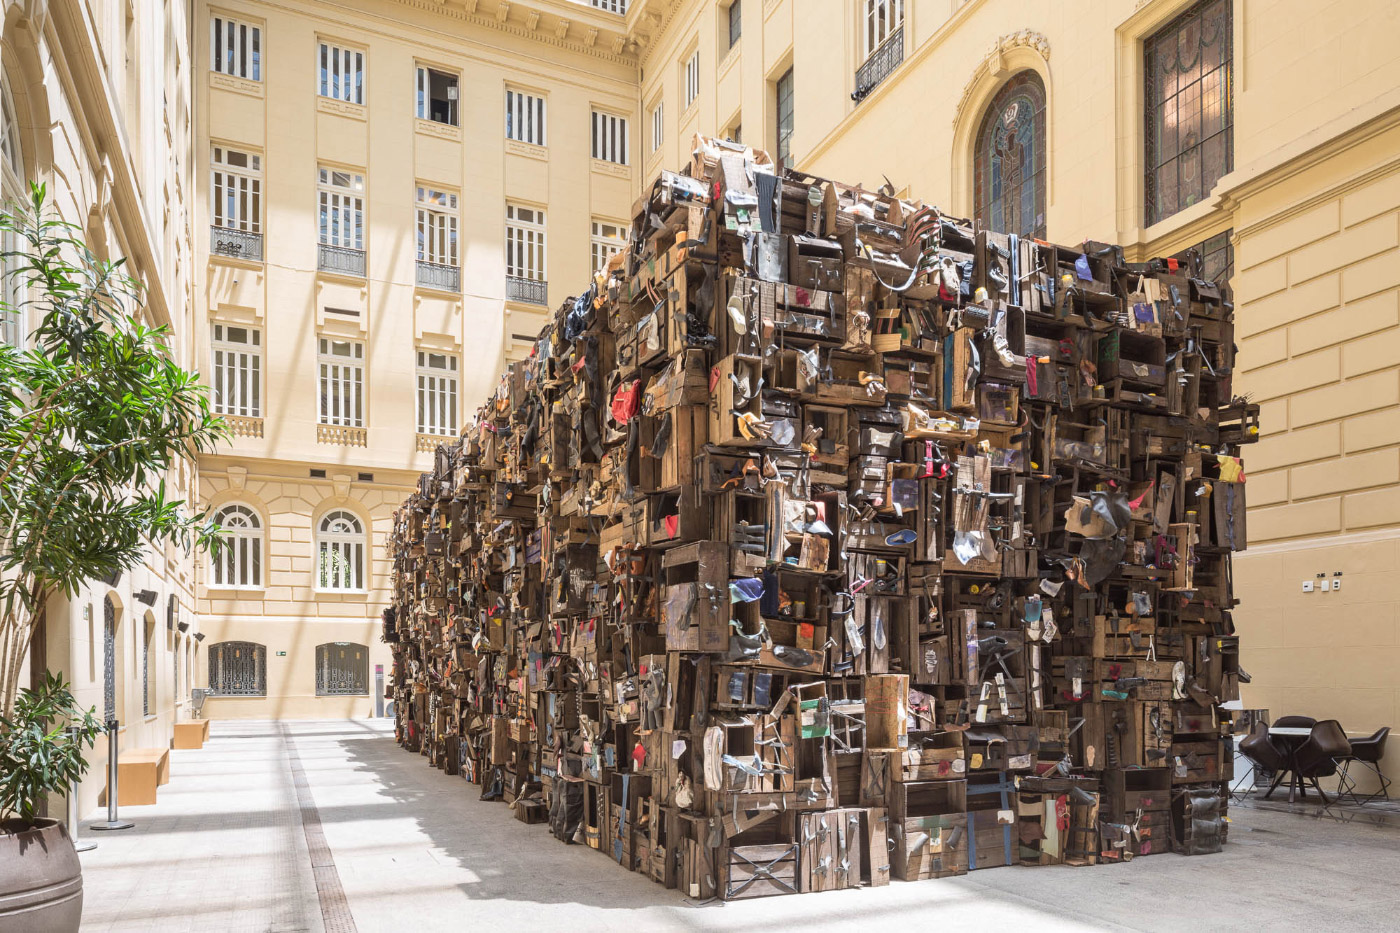 An art object made of crates